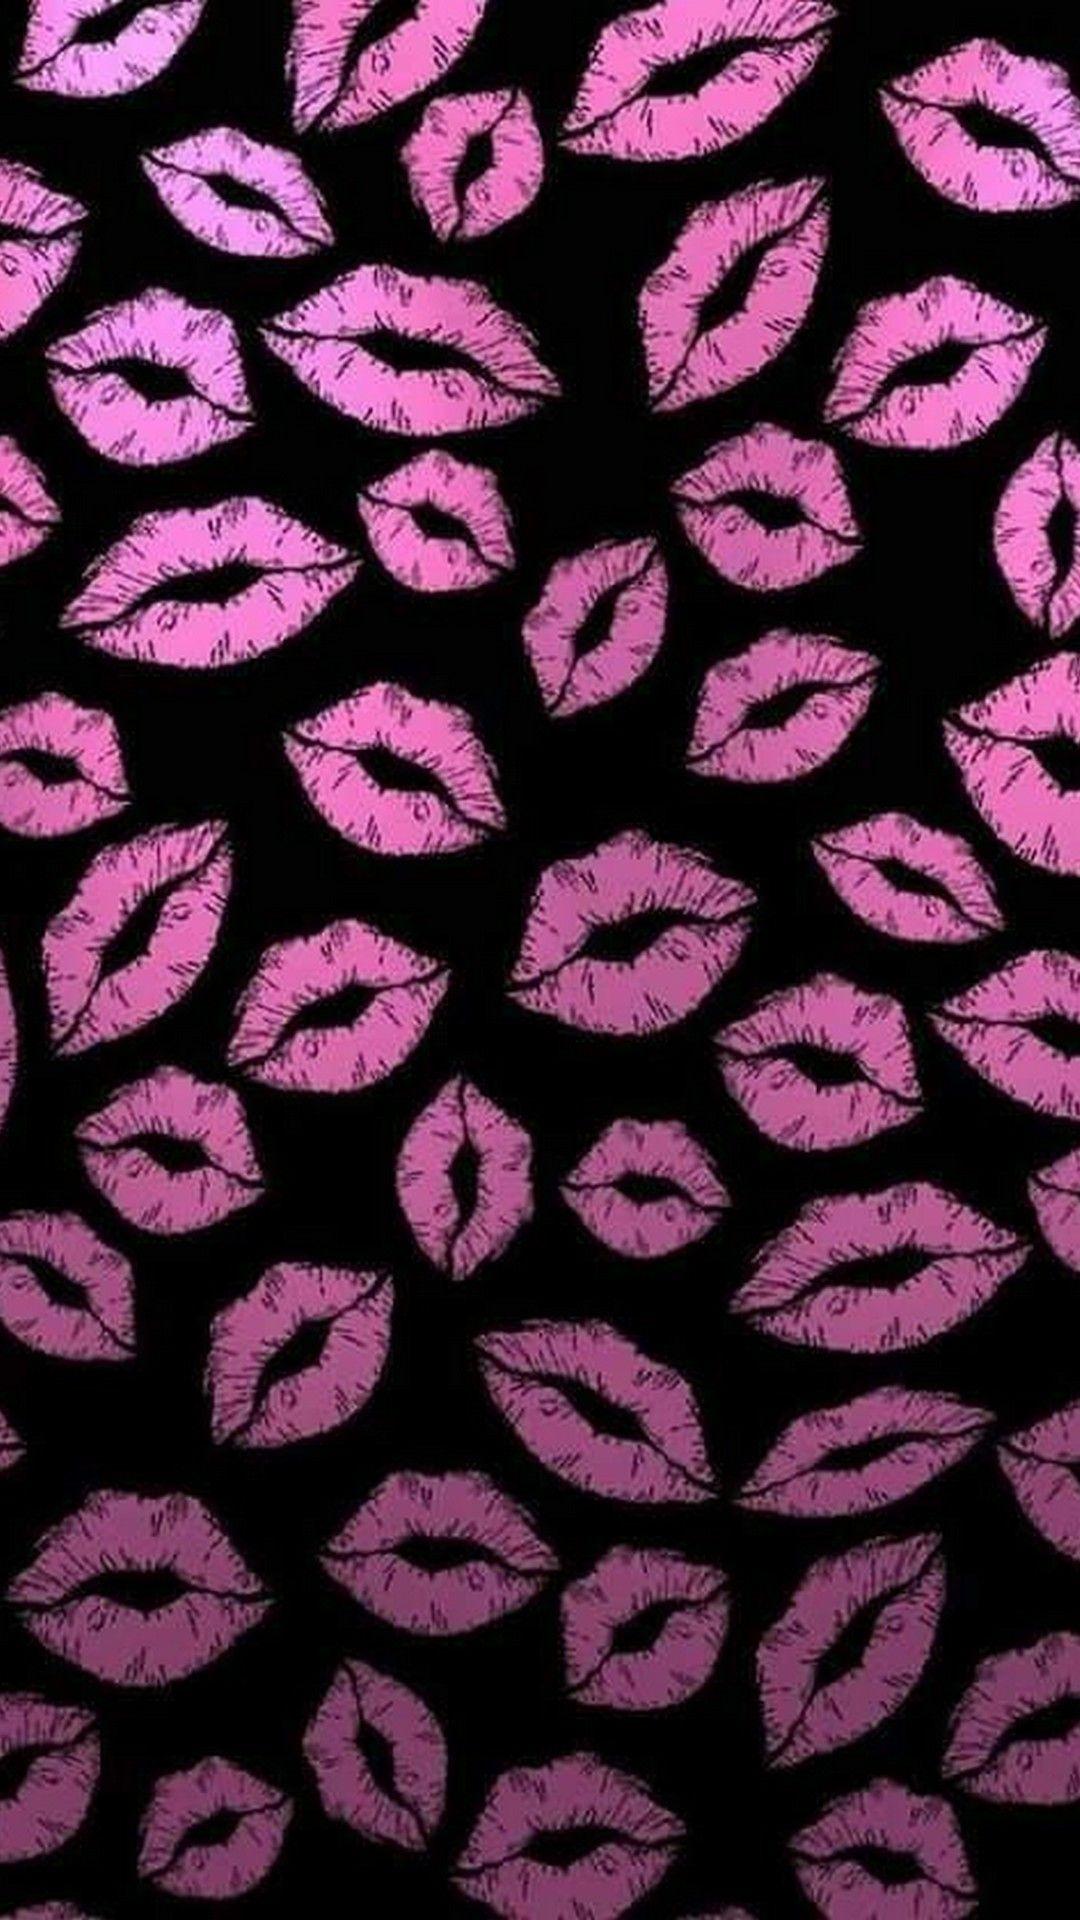 Pink And Black Kiss Wallpaper Mobile. Best HD Wallpaper. Pink